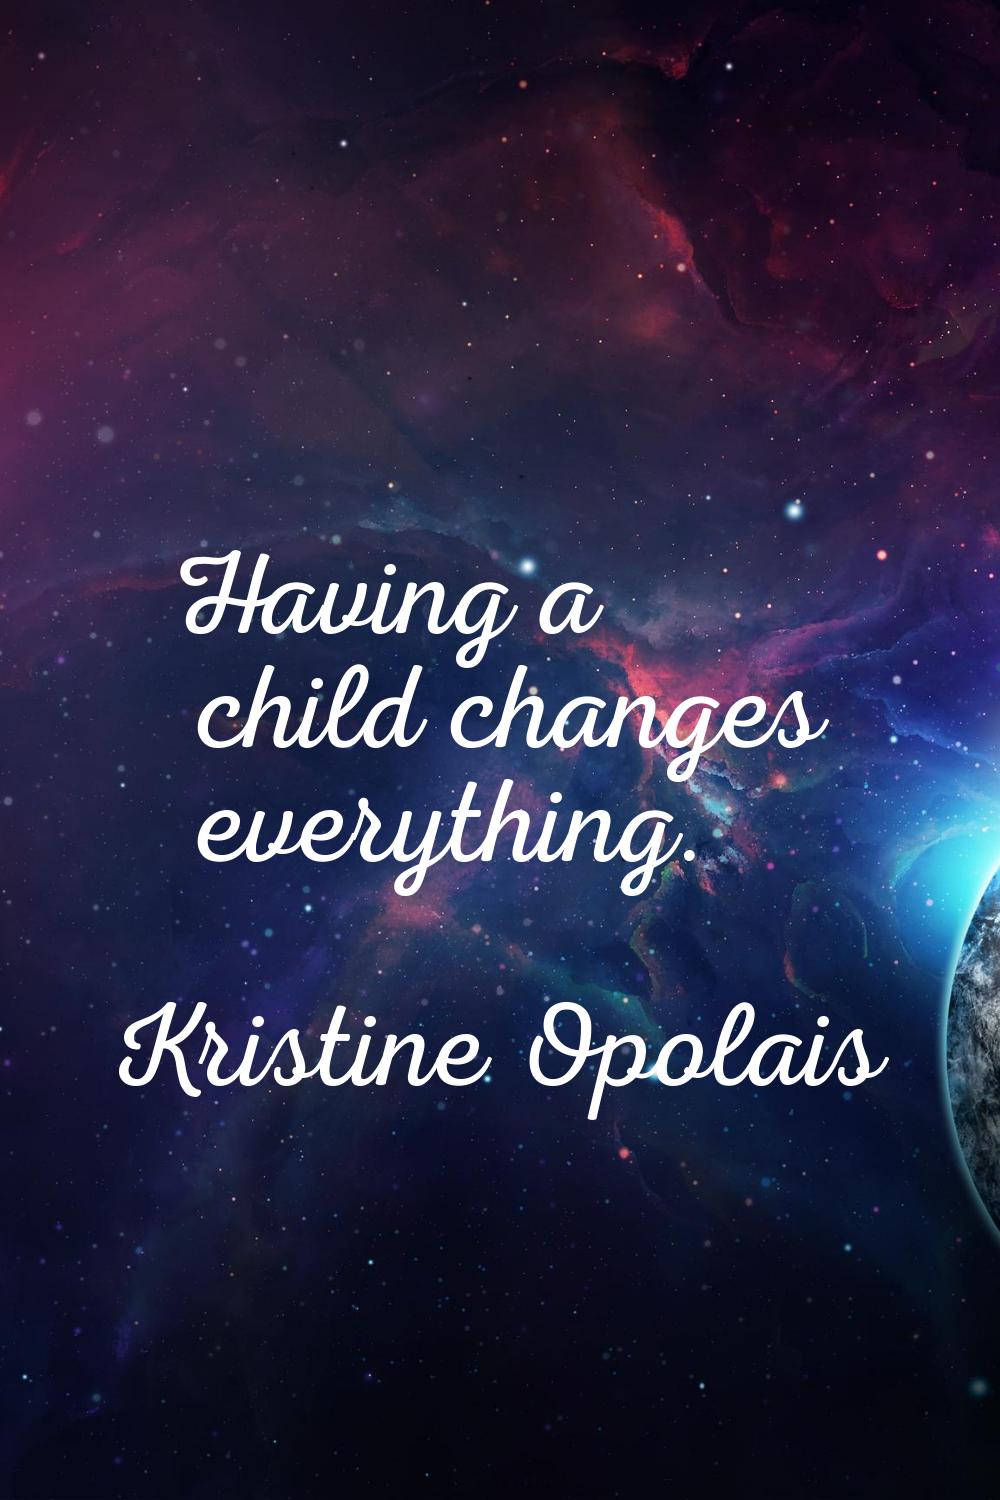 Having a child changes everything.